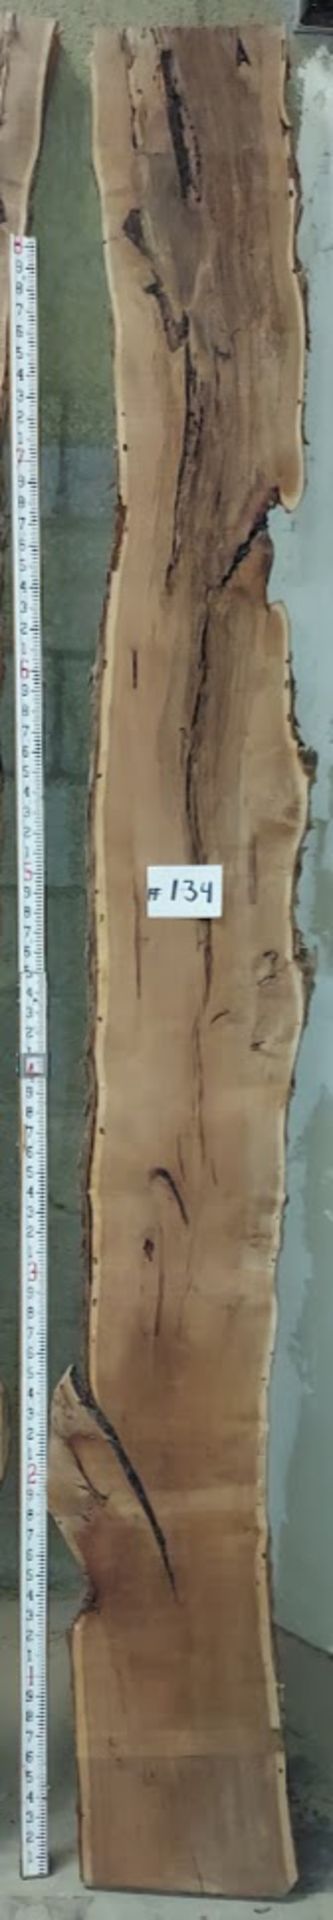 Mesquite Hardwood Lumber Slab, Size is approx. 108" x 9-1/2" - 13" x 2-1/4" Thick (Book Matched